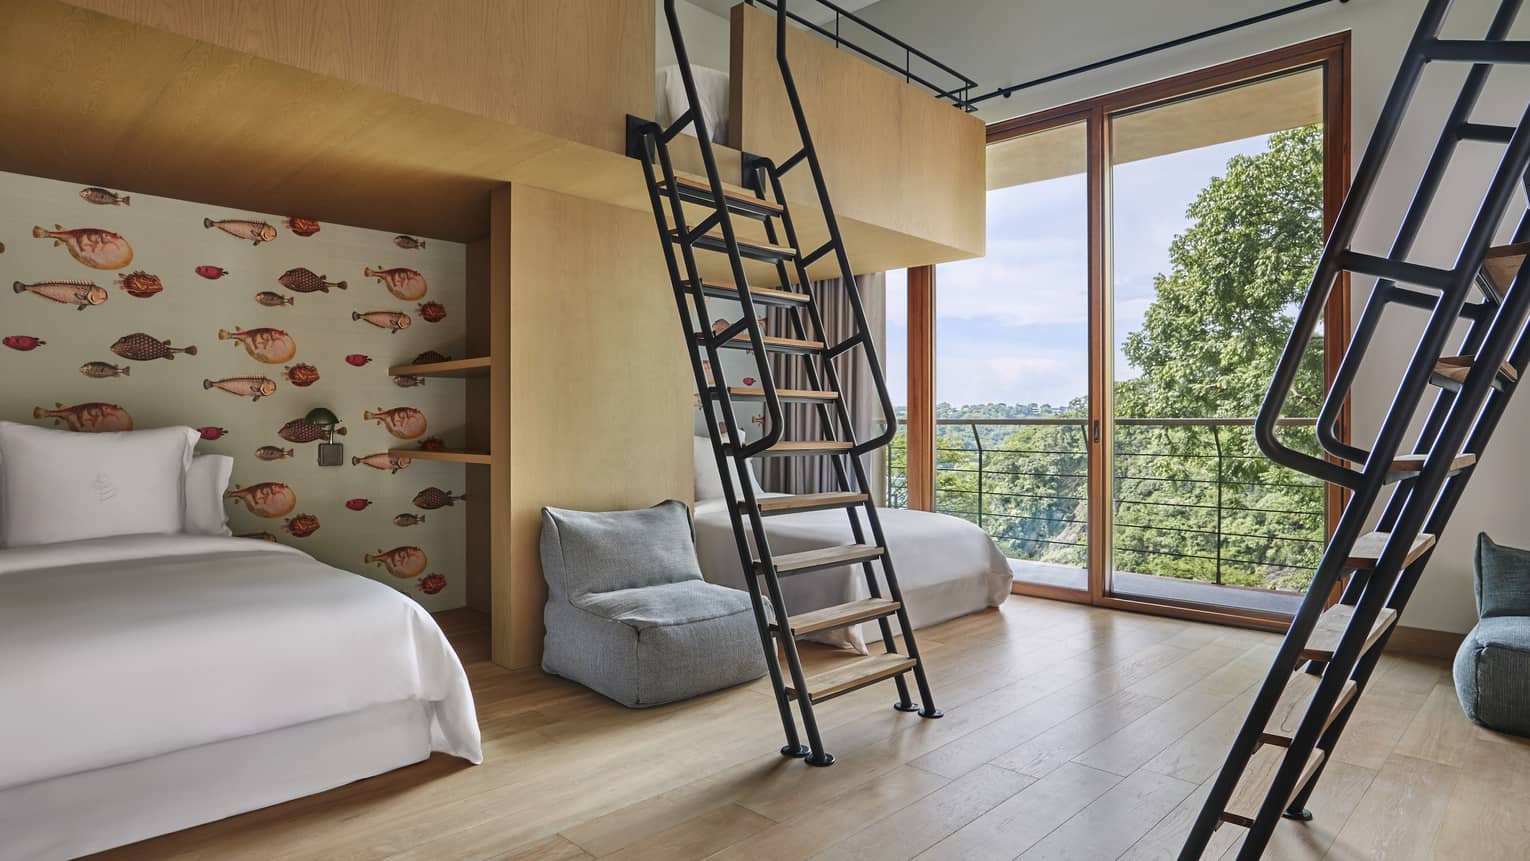 Bedroom with twin beds on the ground floor, and two ladders lead up to built-in bunk beds